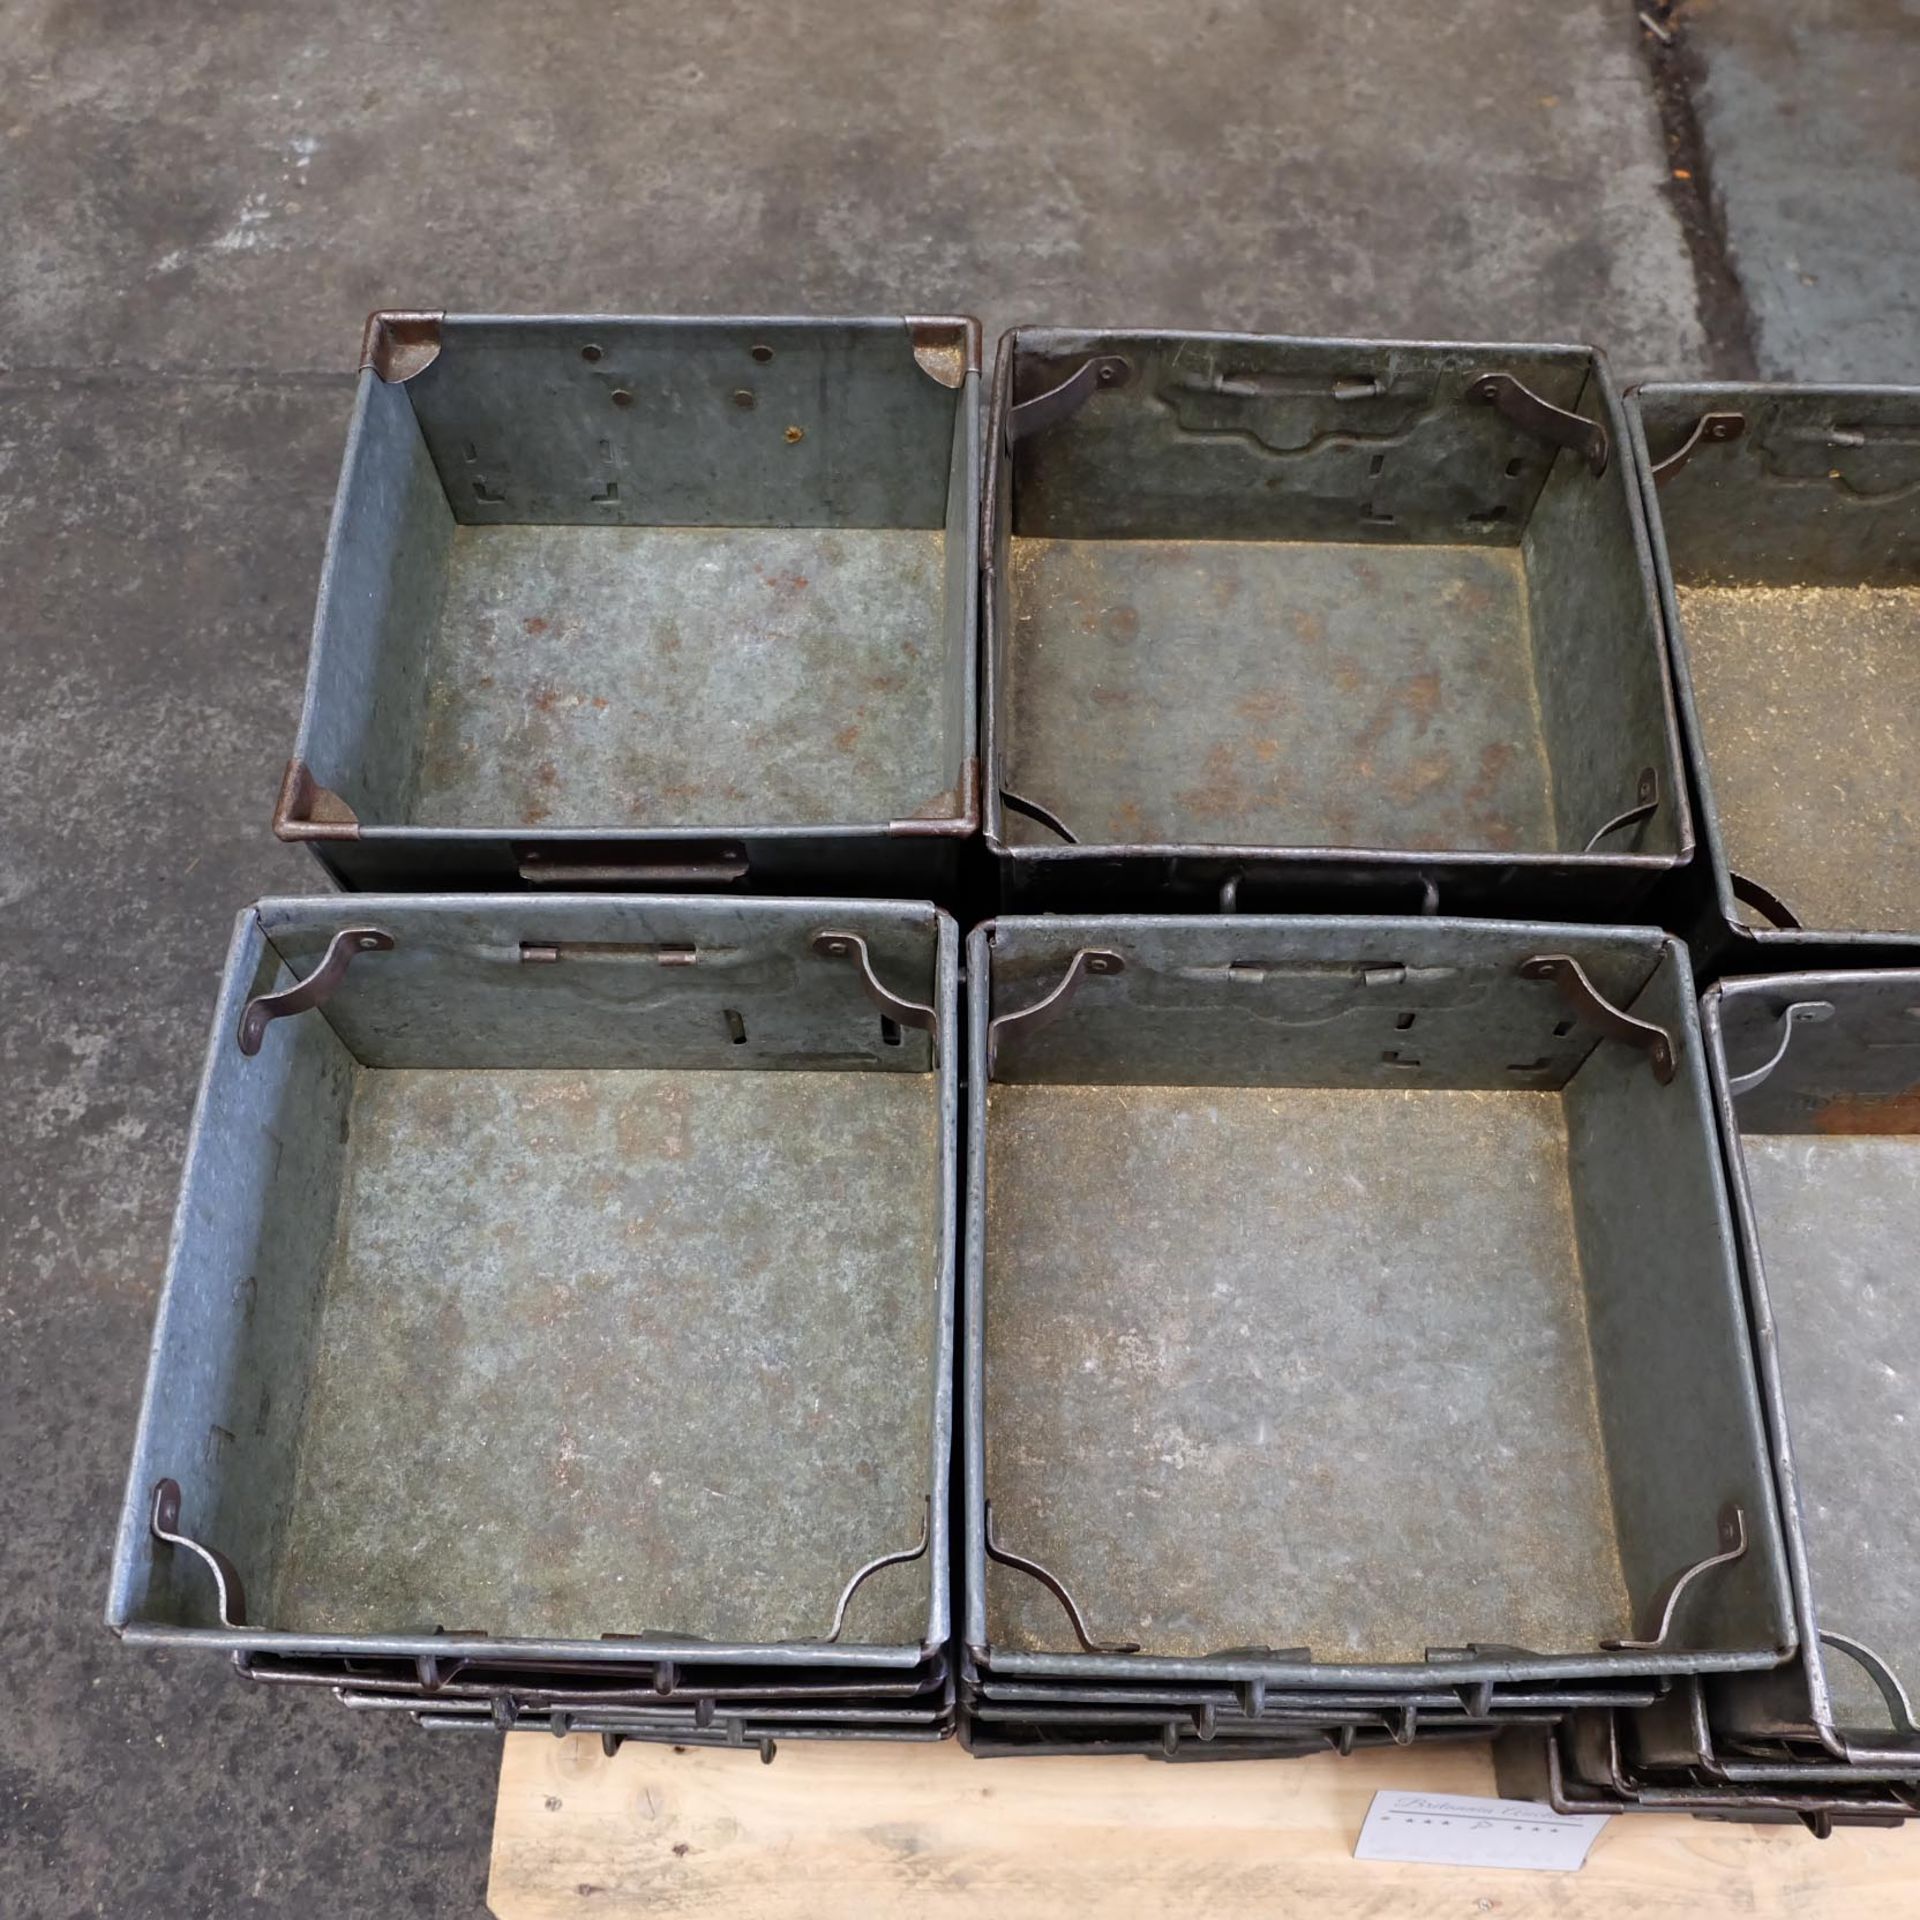 Quantity Of 32 Tote Bins With Handles. - Image 3 of 4